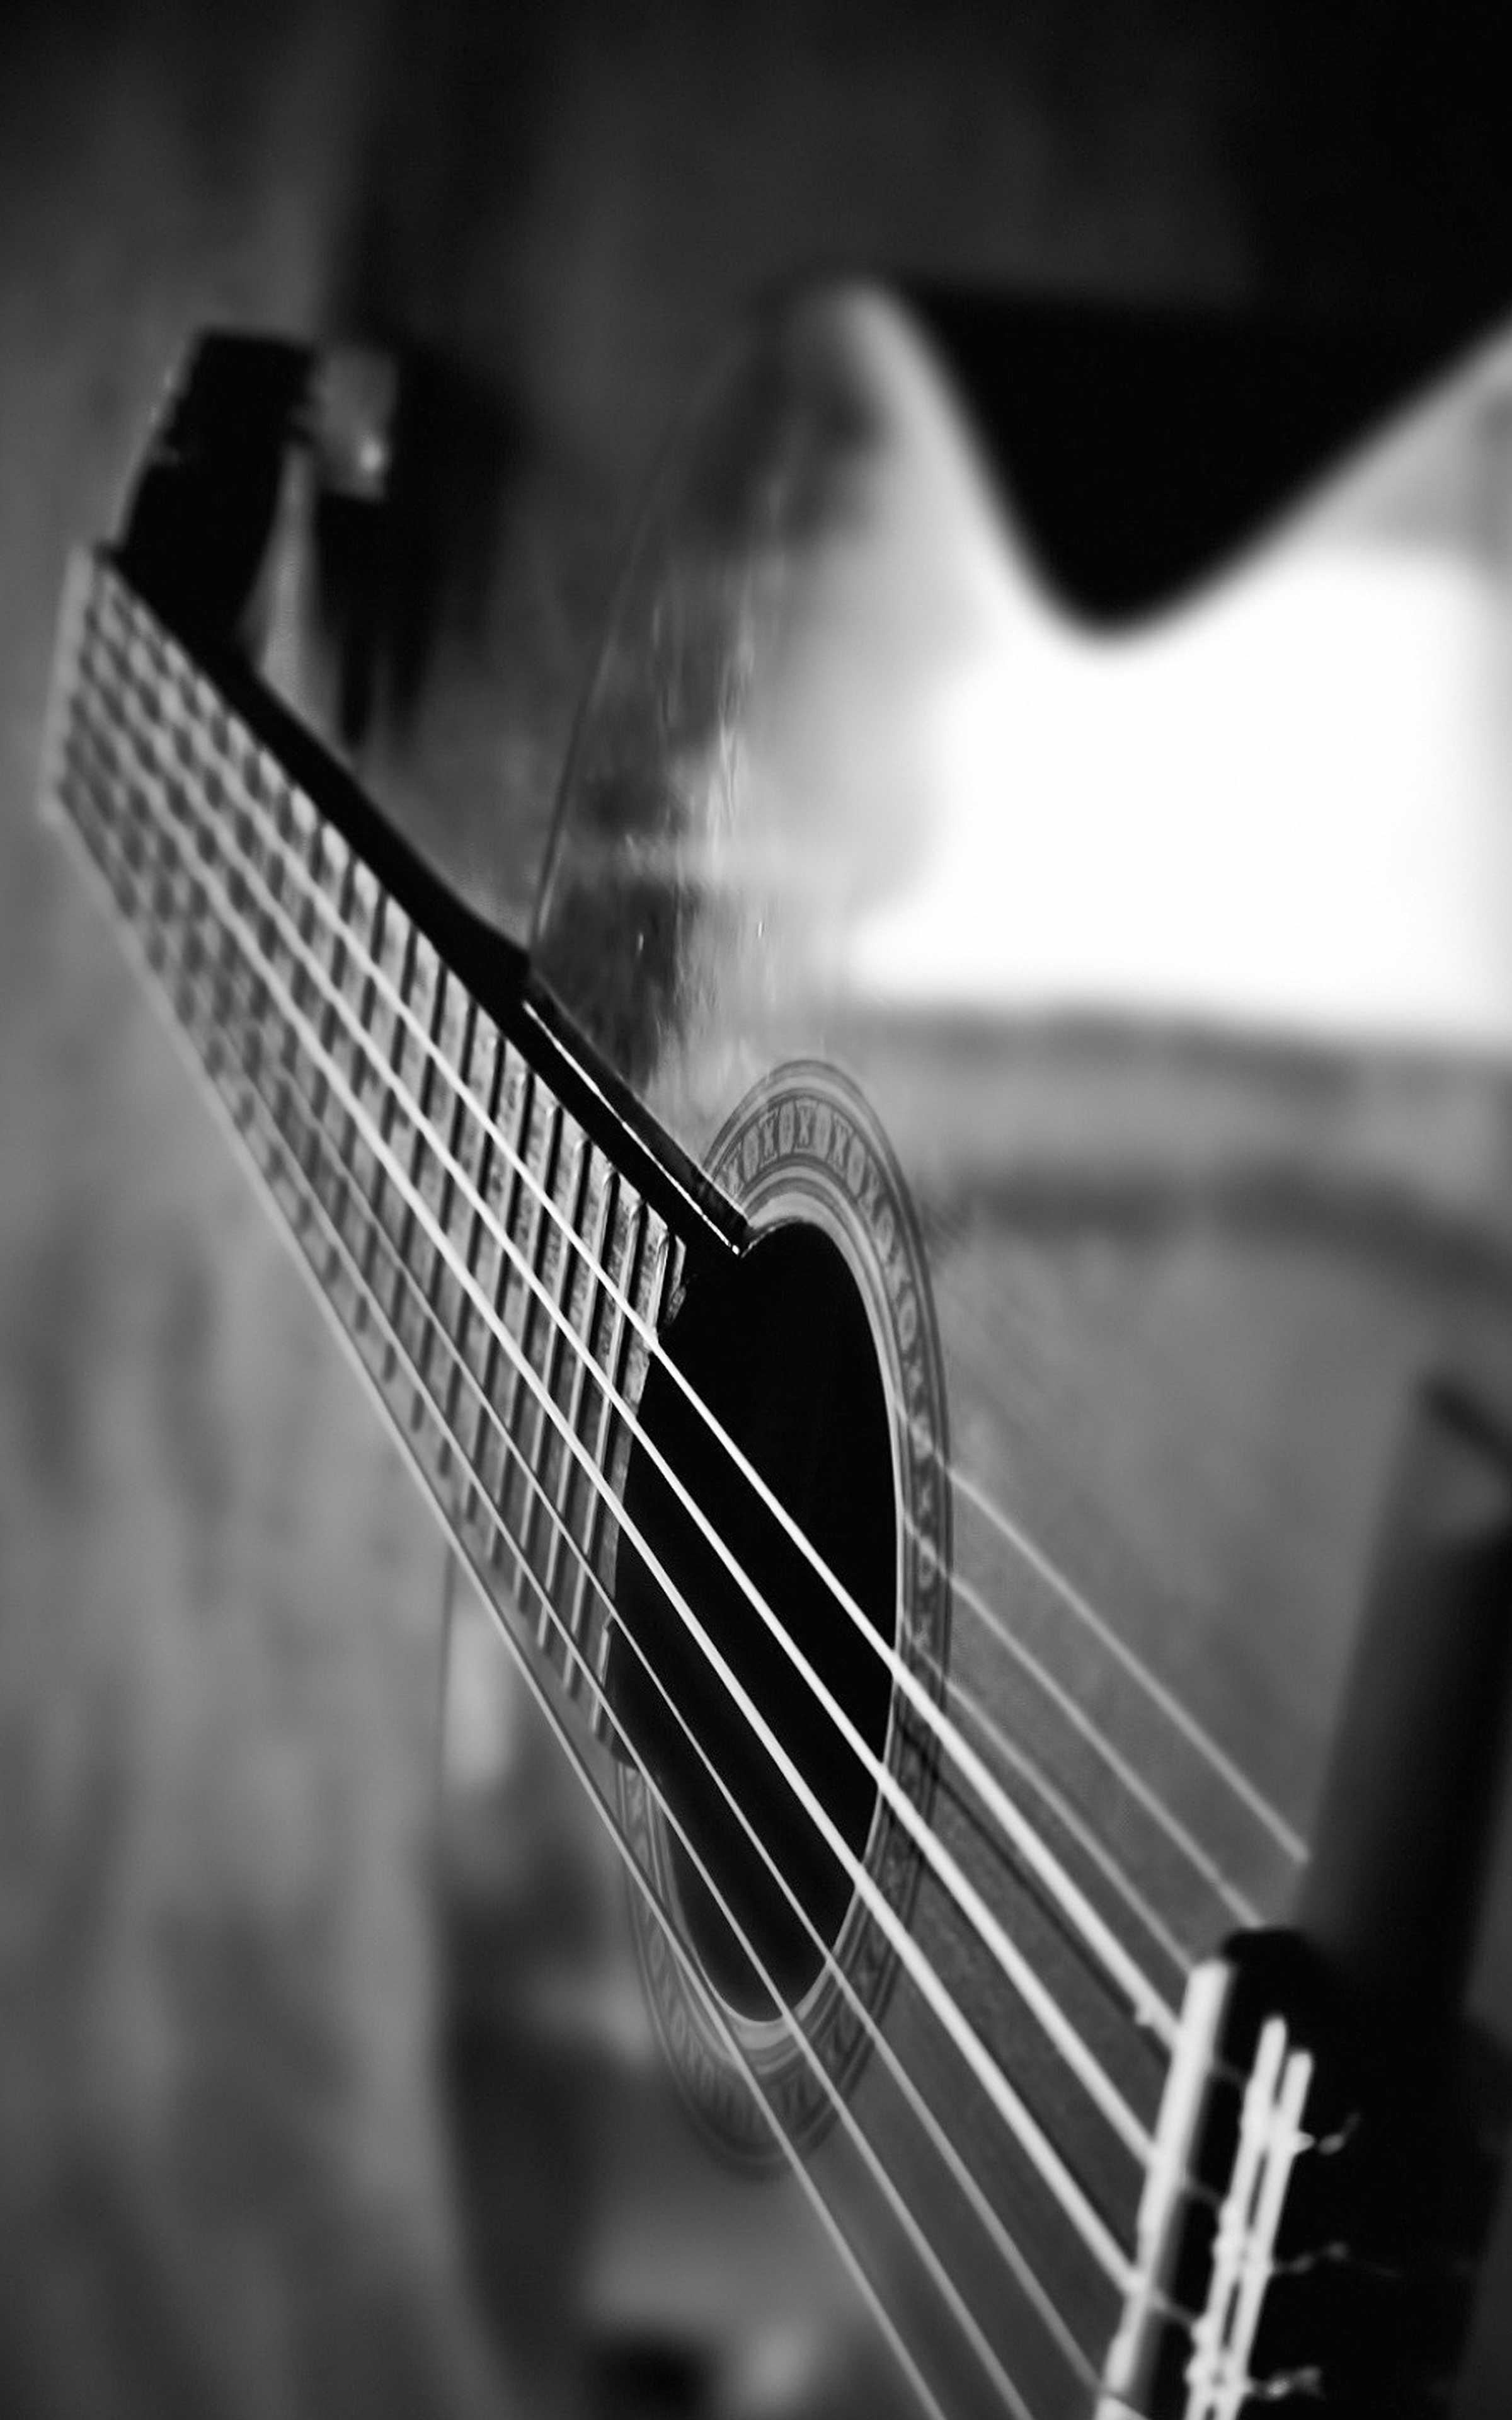 Guitar Wallpaper - Best Cool Guitar Wallpapers for Android - APK ...